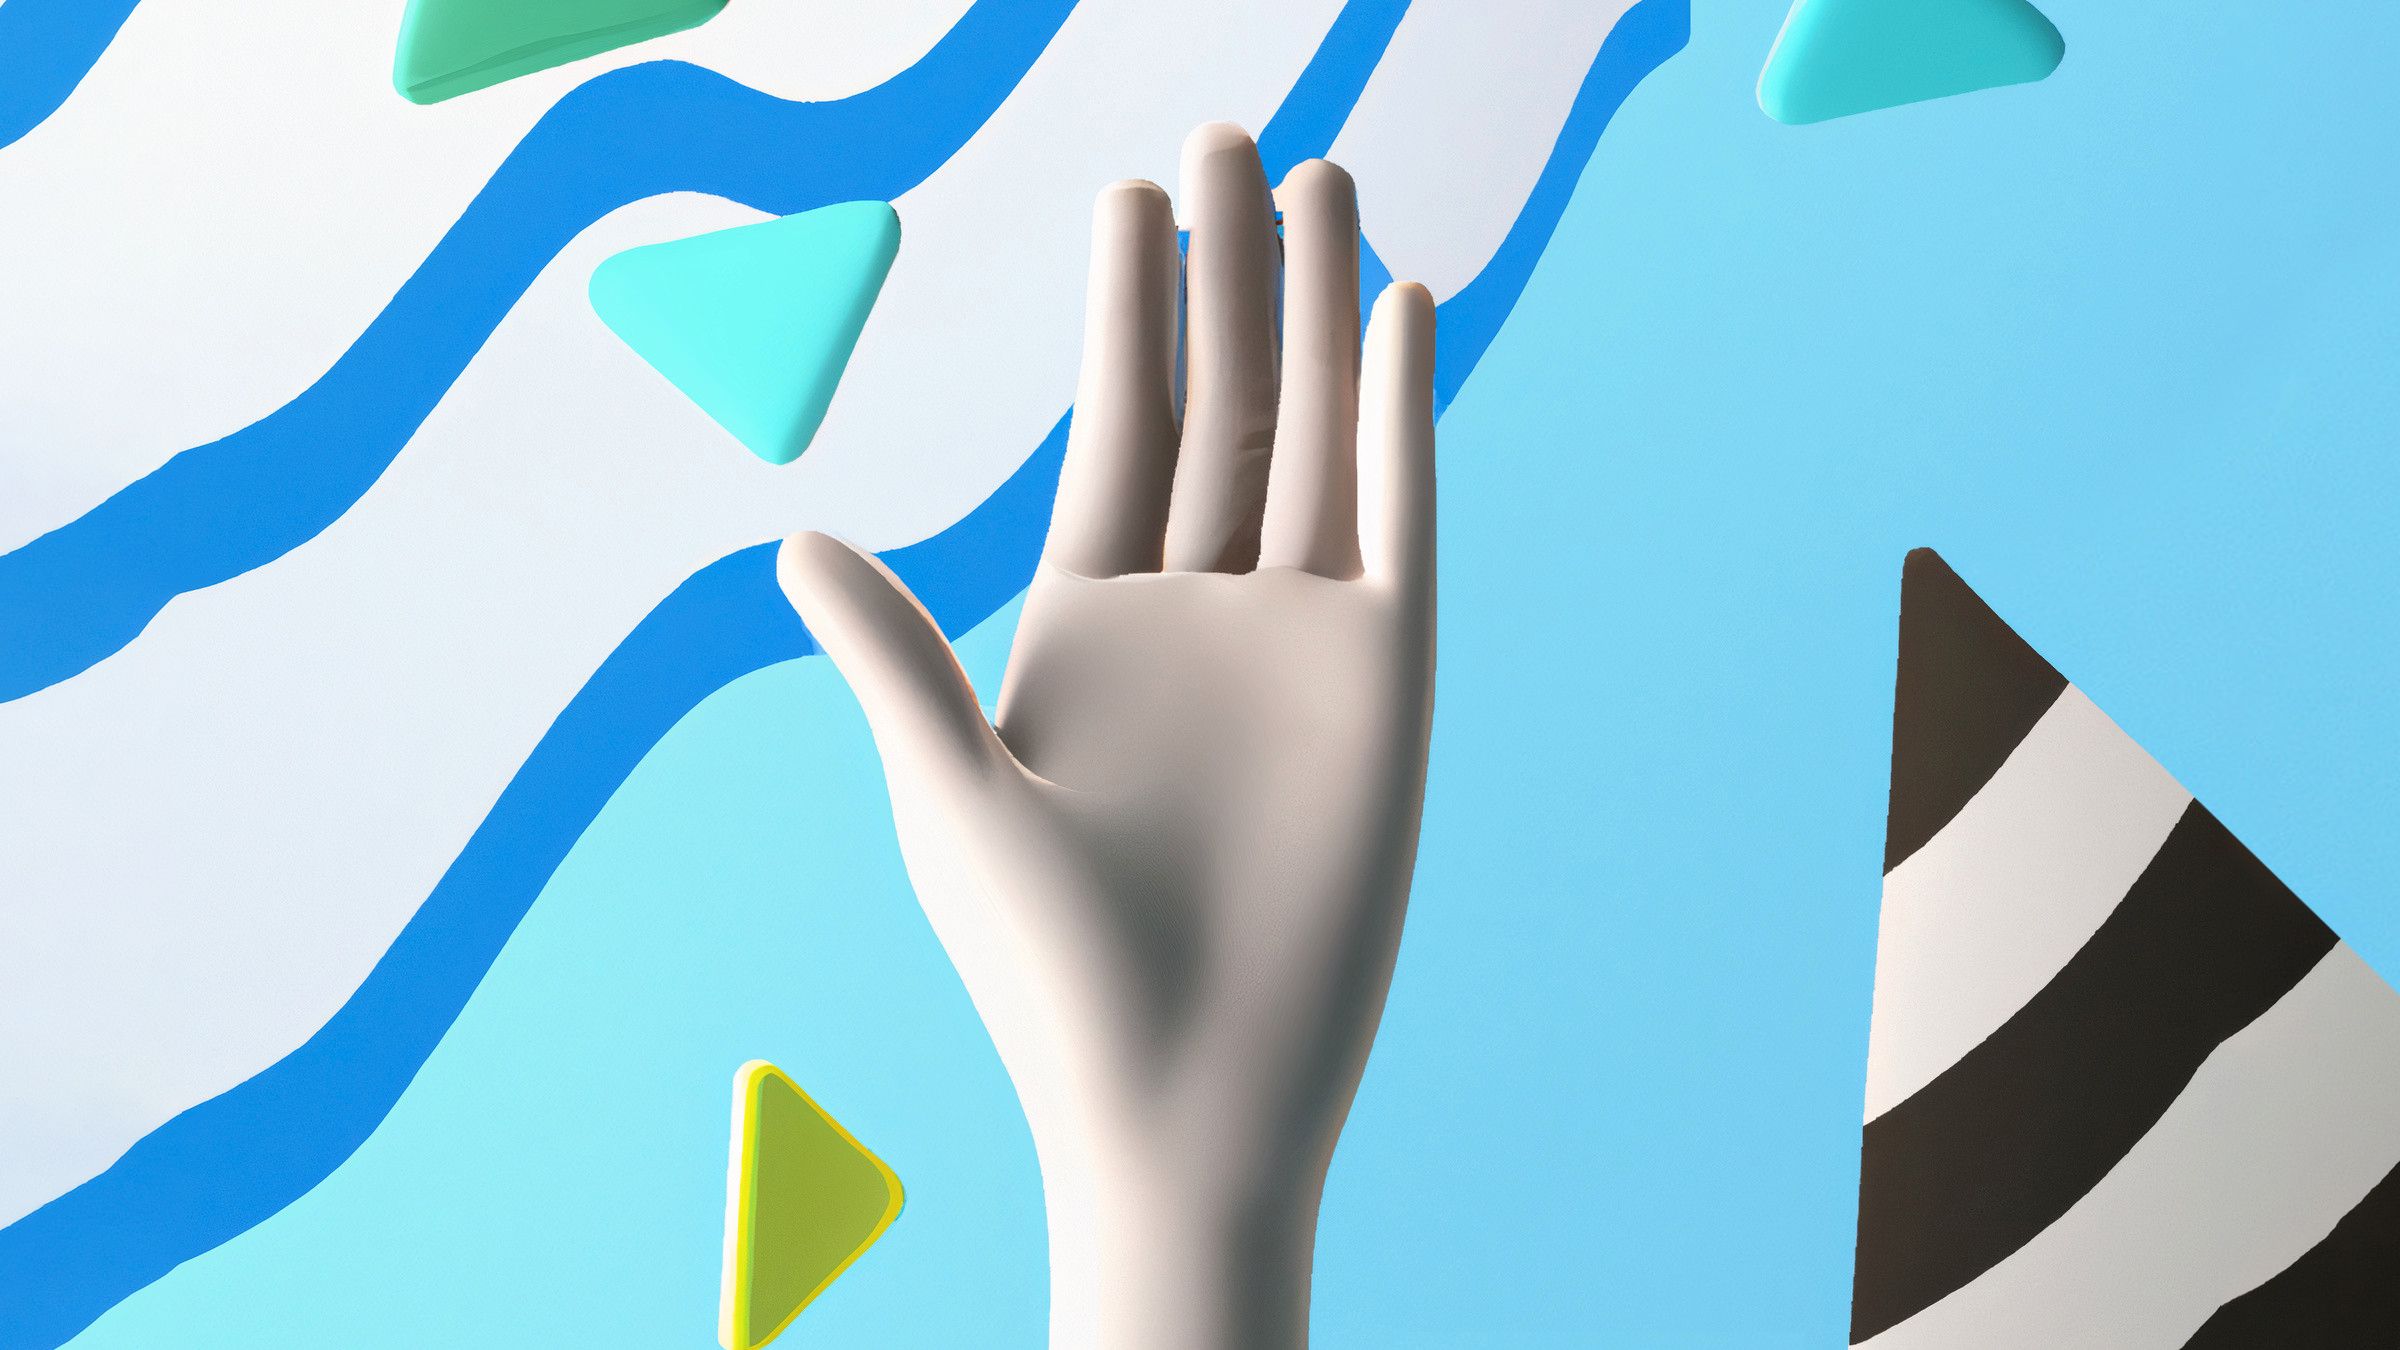 3d render of a hand waving surrounded by floating chevrons in a light blue environment